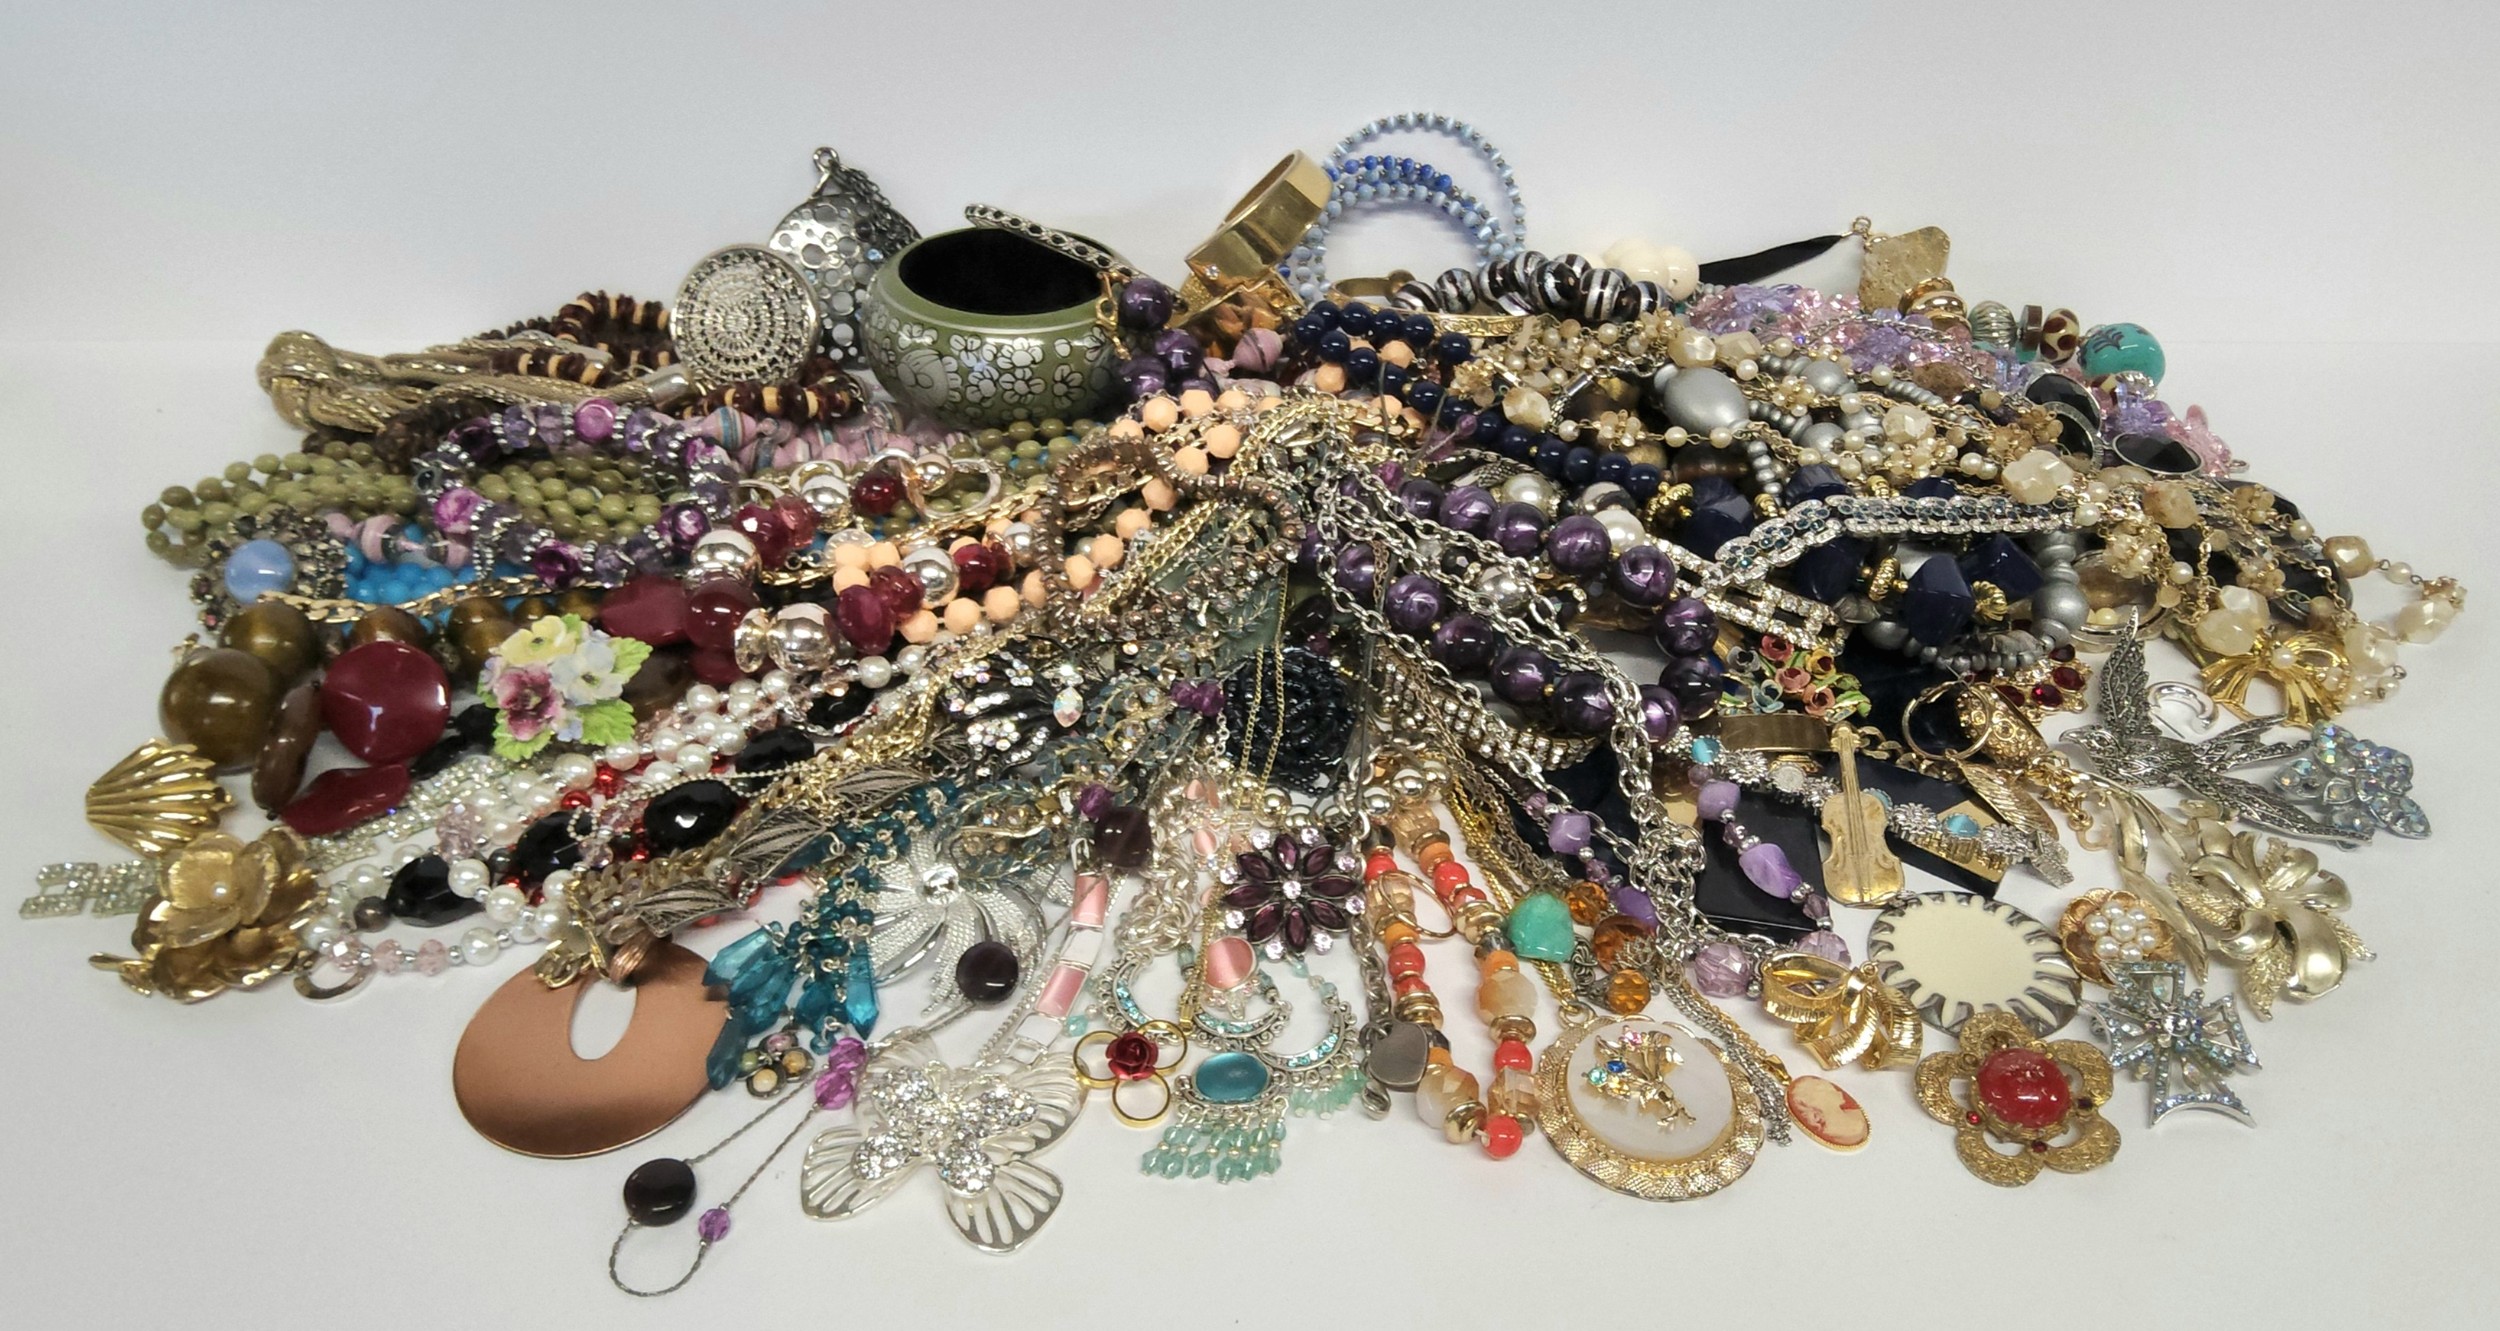 Costume jewellery including beads, necklaces, bracelets and brooches etc.